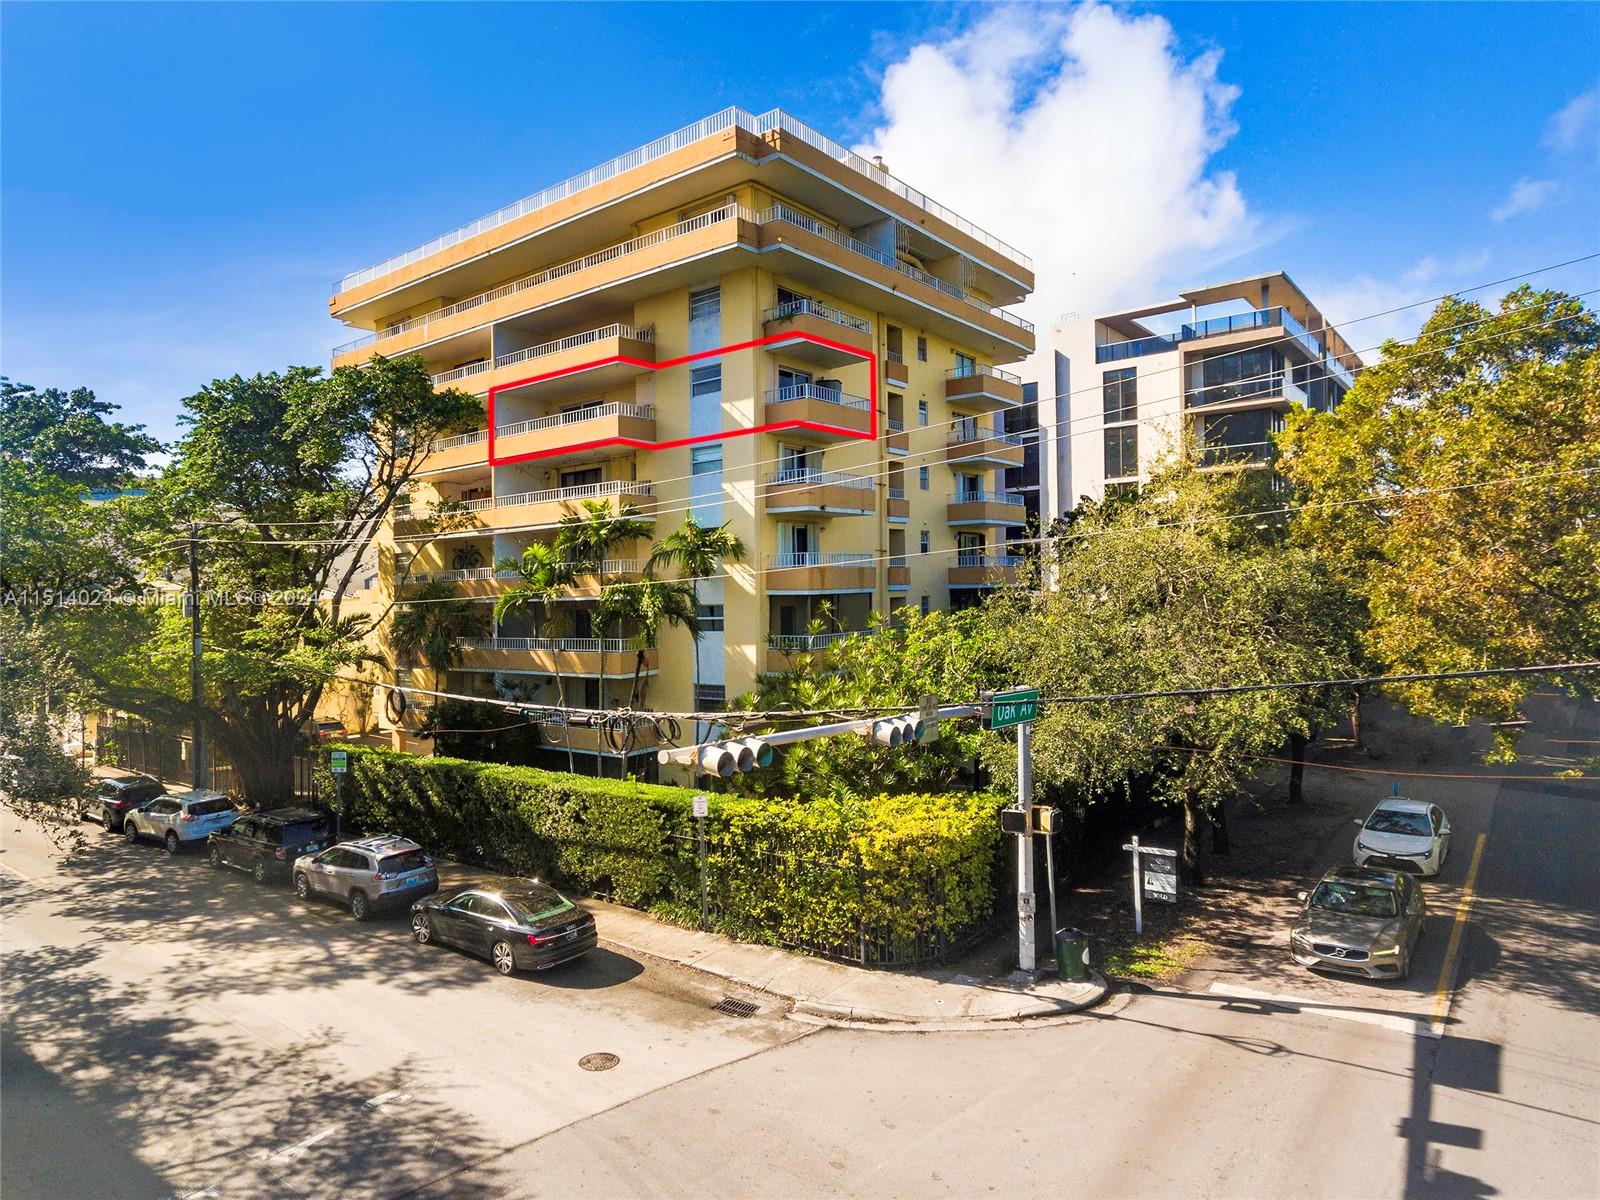 BEAUTIFUL 1/1 CONDO IN THE HEART OF COCONUT GROVE! PRIME/A+++ LOCATION! WALK TO RESTAURANTS, CAFES, SHOPS, PARKS! VIRGINIA OAKS CONDO IS A BOUTIQUE BLDG W/ONLY 27 UNITS (4 UNITS PER FLOOR). RESIDENCE 6A IS A CORNER UNIT (NW SIDE). FEATURES 2 LARGE BALCONIES W/ BEAUTIFUL/PANORAMIC CITY SKYLINE VIEWS. SPACIOUS/VERY COMFORTABLE LIVING/DINING ROOM AREAS IDEAL FOR ENTERTAINING. MASTER BEDROOM HAS ITS OWN PRIVATE BALCONY + PLENTY OF CLOSET SPACE. KITCHEN FEAUTURES STAINLESS STEEL APPLIANCES. NEW A/C SYSTEM 2023. FRESHLY PAINTED. IMPACT SLIDING GLASS DOORS. 1 PARKING SPACE. GATED COMMUNITY. AMAZING WATER/BAY VIEWS FROM THE ROOFTOP. COMMUNITY LAUNDRY ROOM (NO W/D IN UNIT). OWNERS PERMITTED TO HAVE 1 DOG UNDER 20 LBS. UNIT CAN BE RENTED IMMEDIATELY! EXCELLENT OPPORTUNITY!